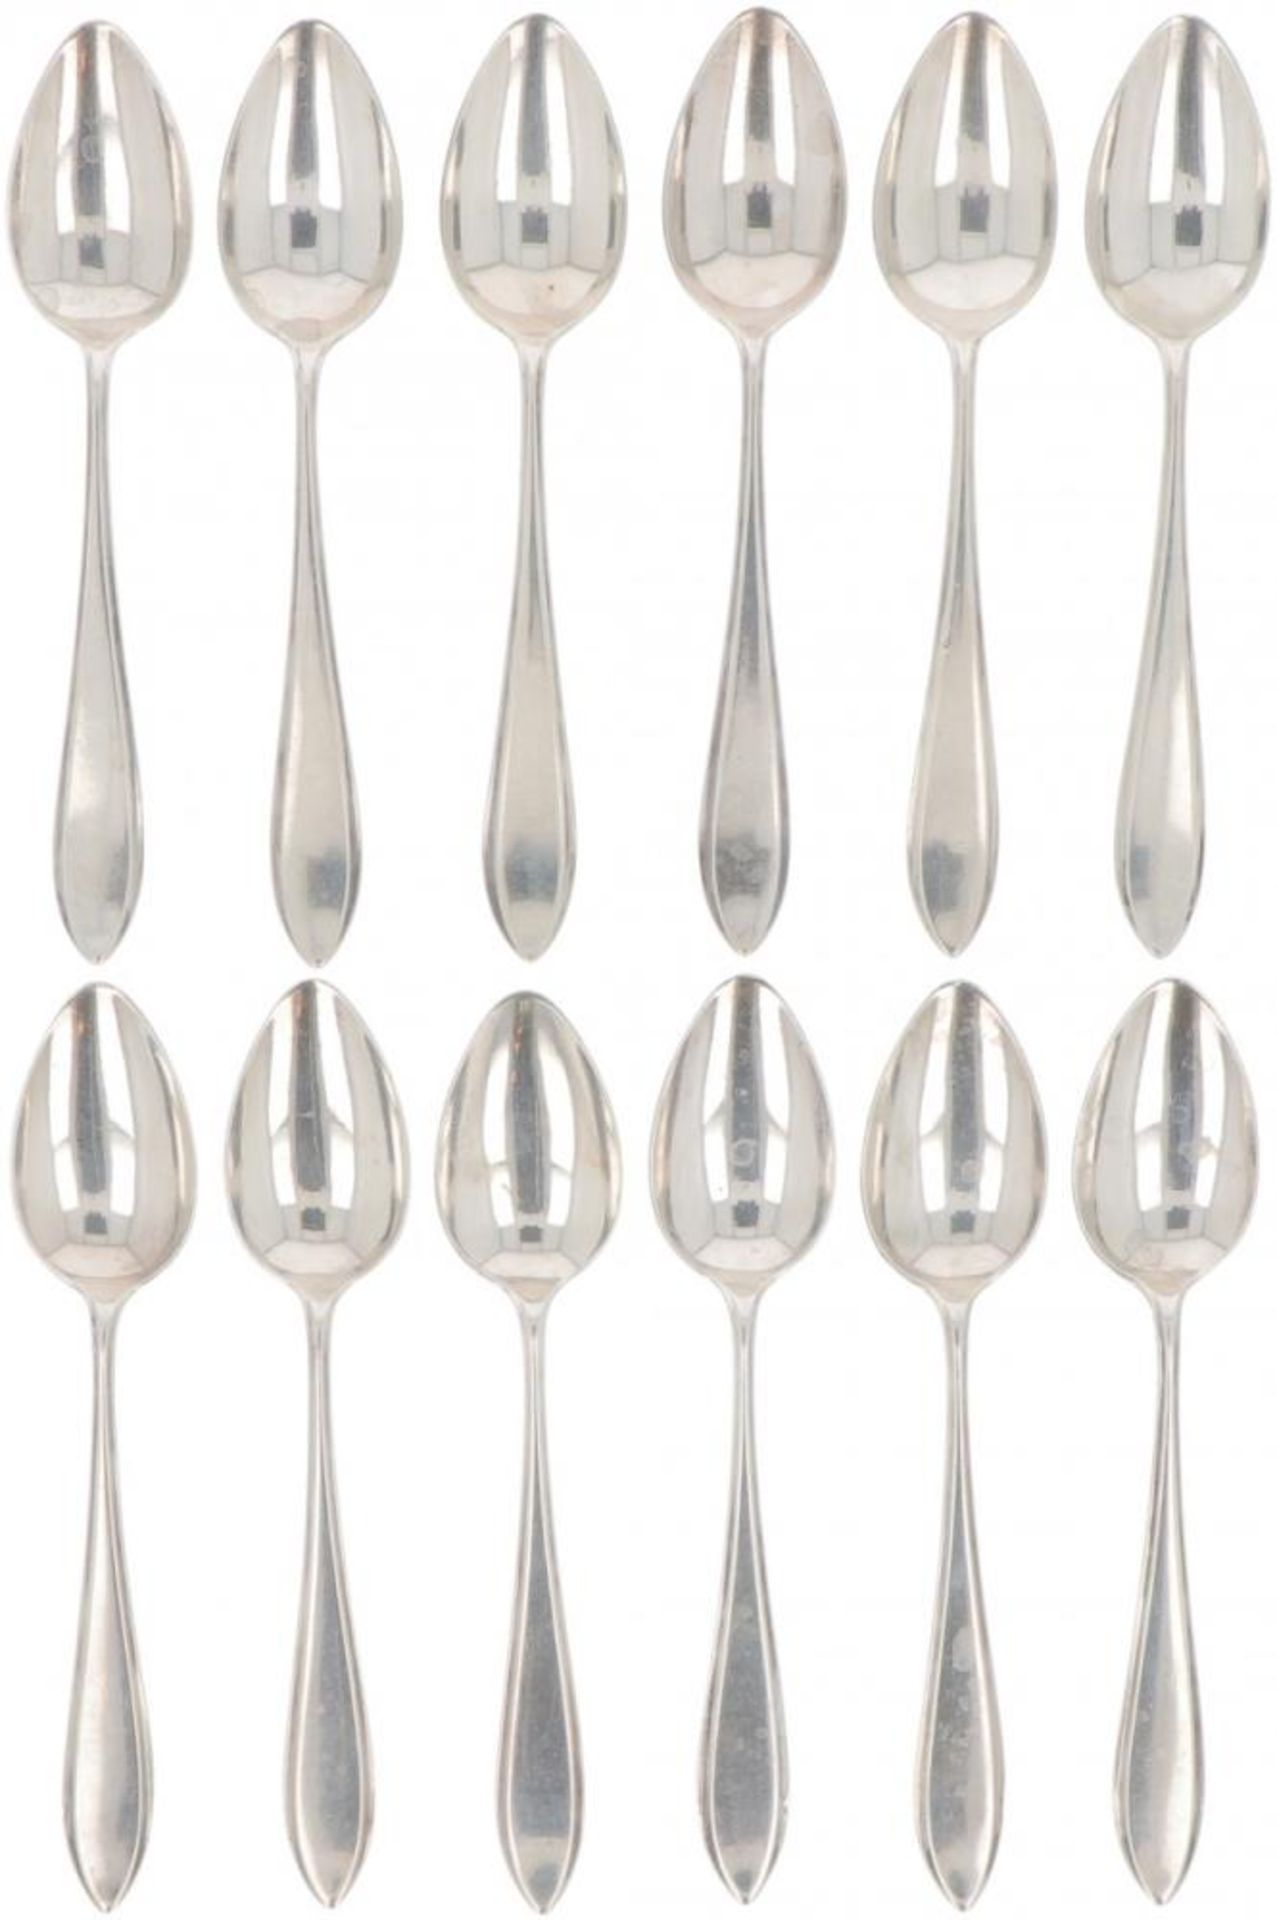 (12) piece set of coffee spoons "Dutch point fillet" silver.